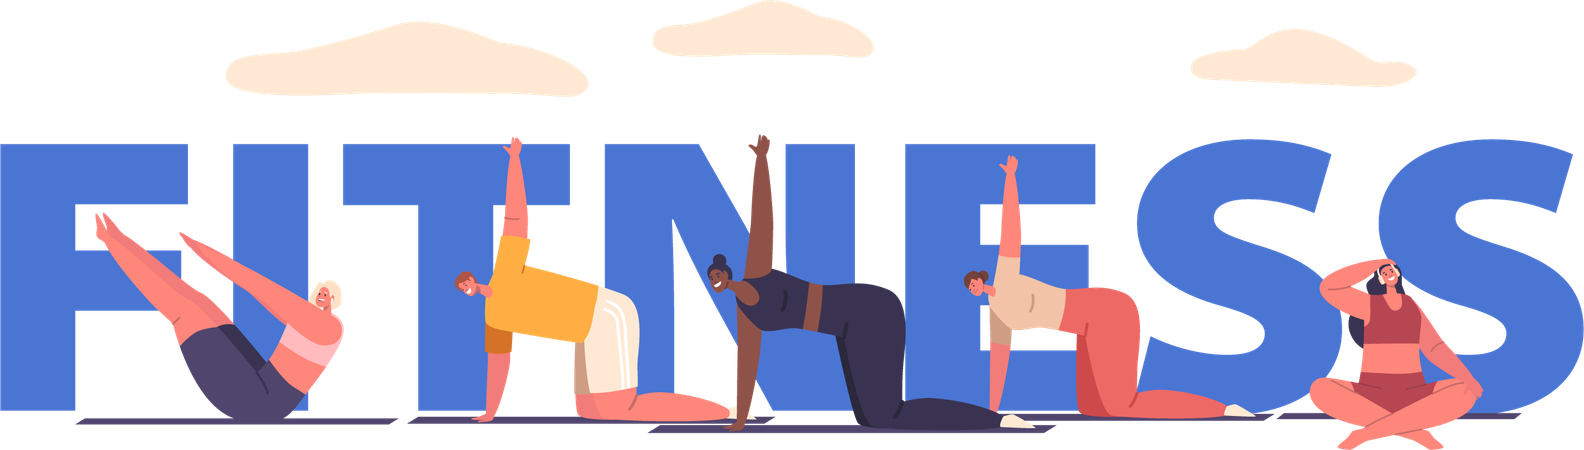 Characters Doing Fitness Exercises  Illustration